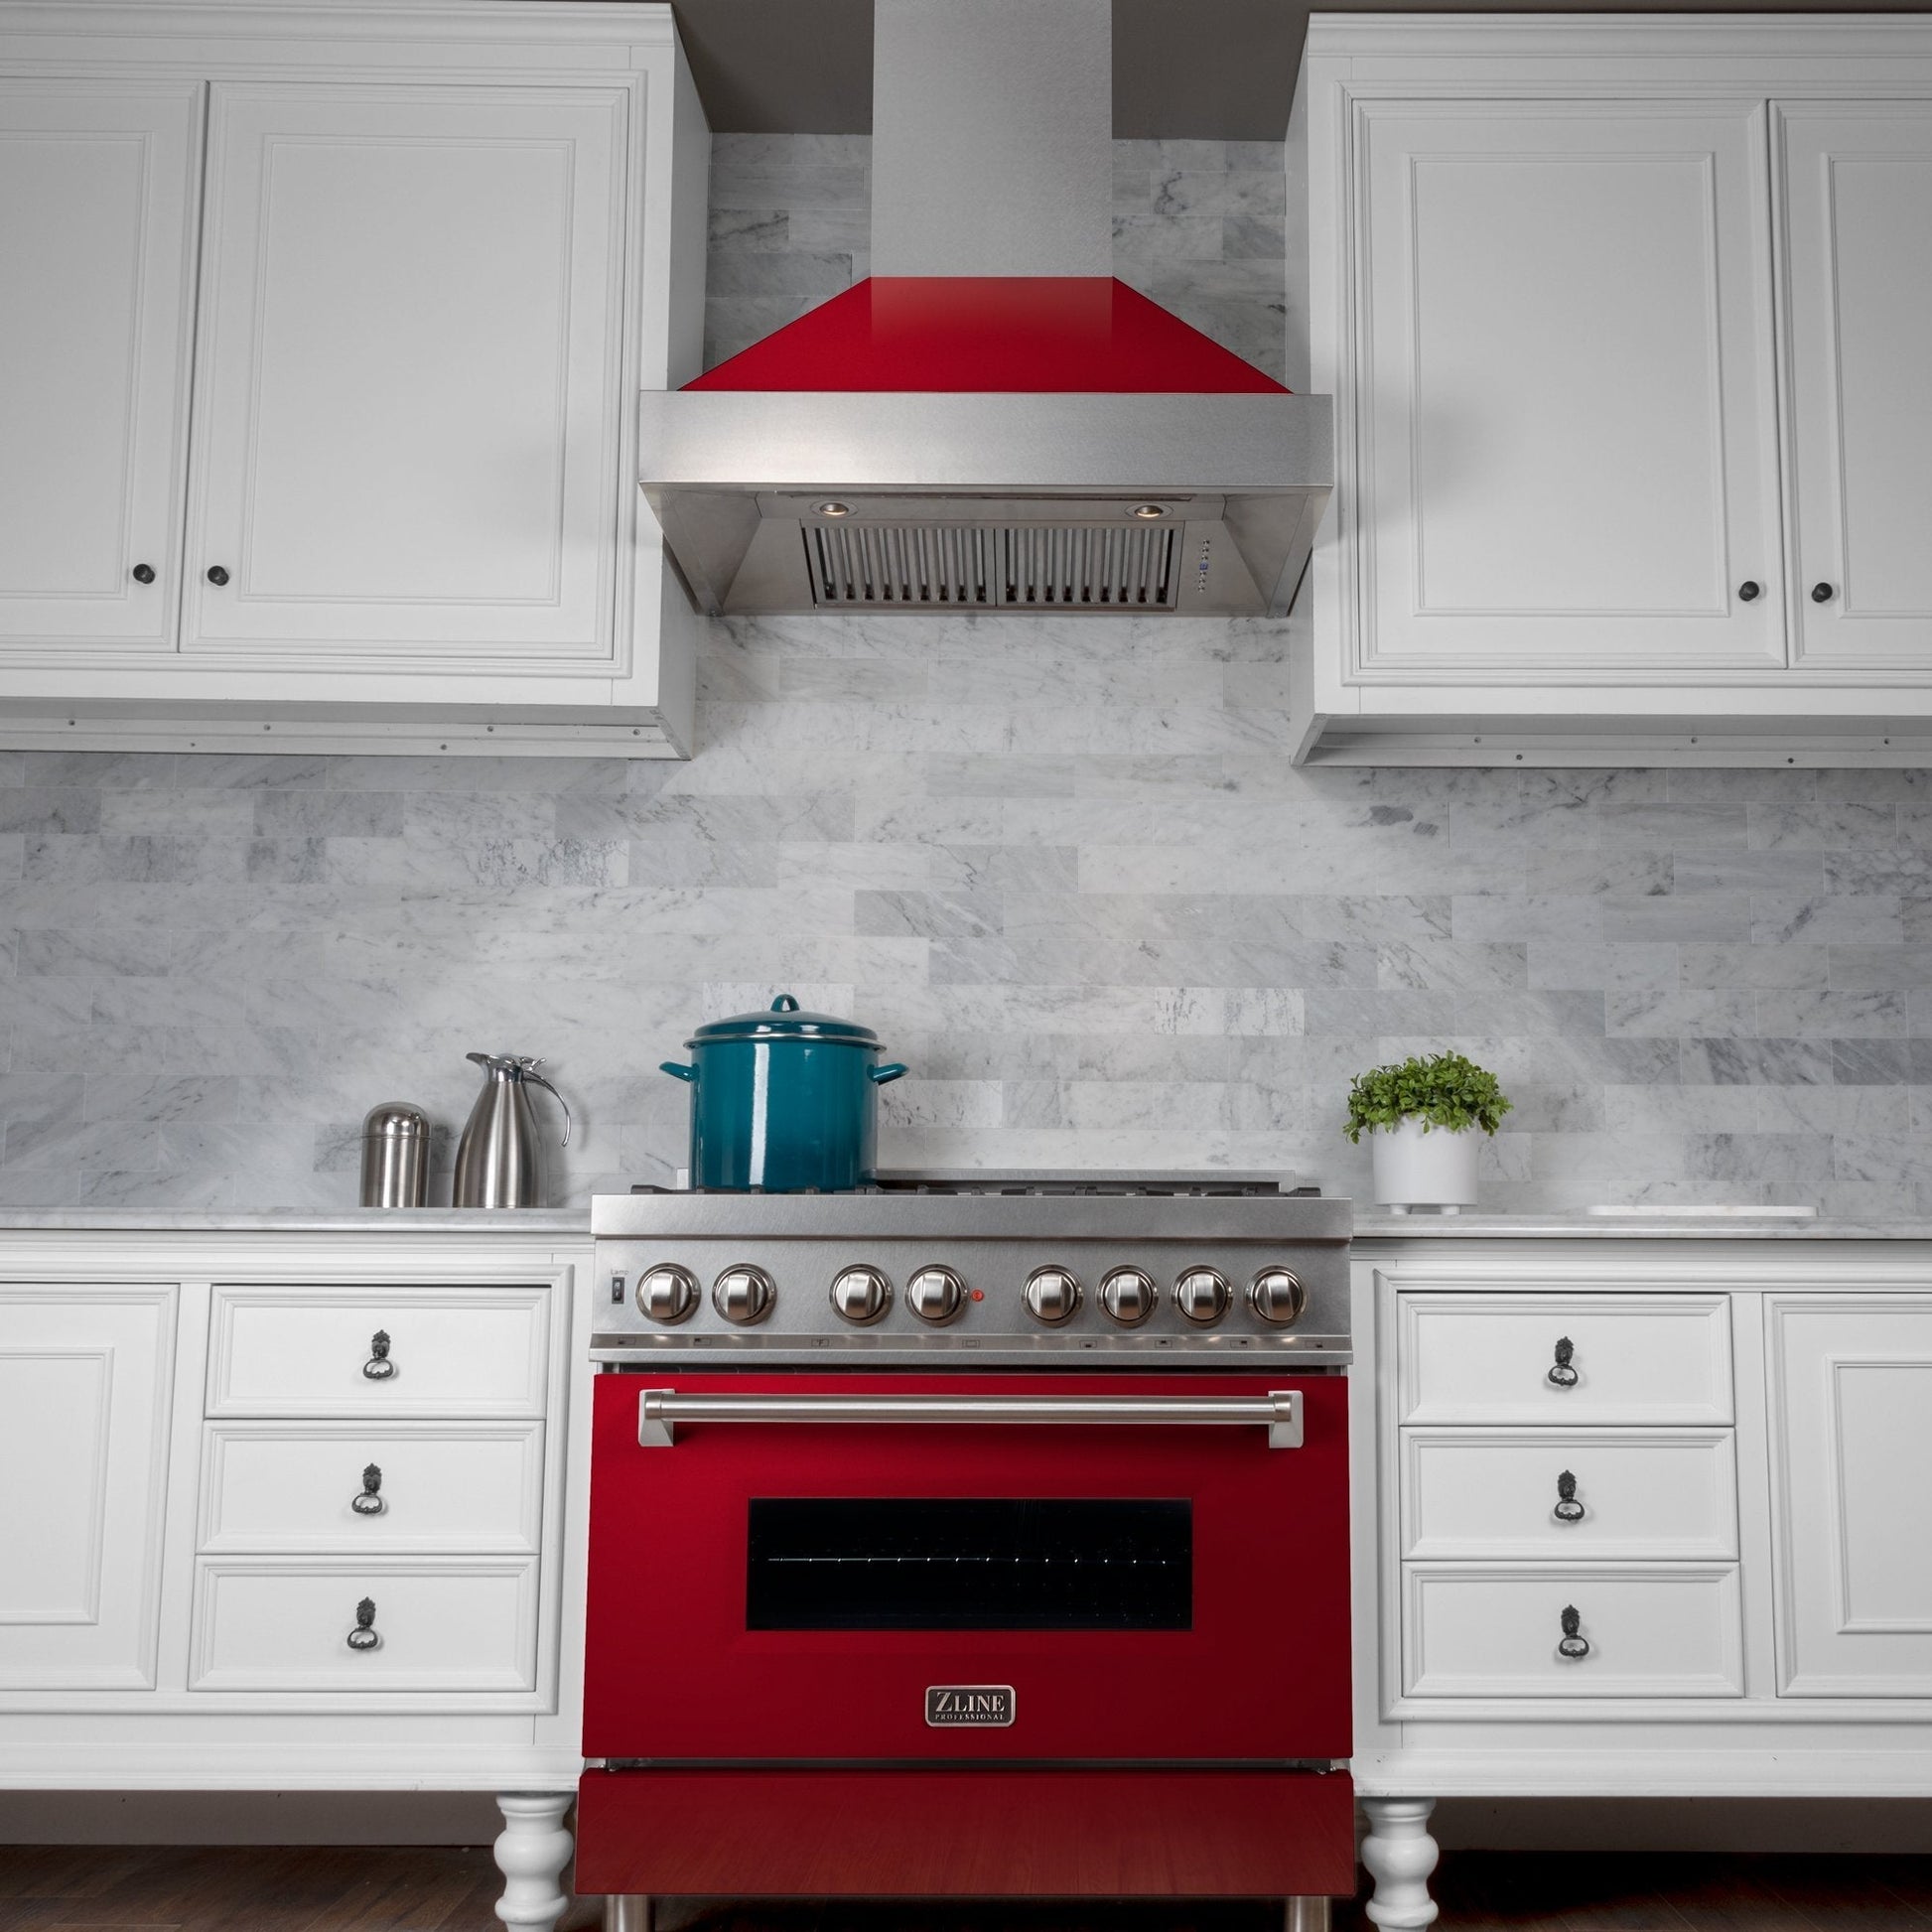 ZLINE Ducted Range Hood - DuraSnow Steel with Glossy Red Shell